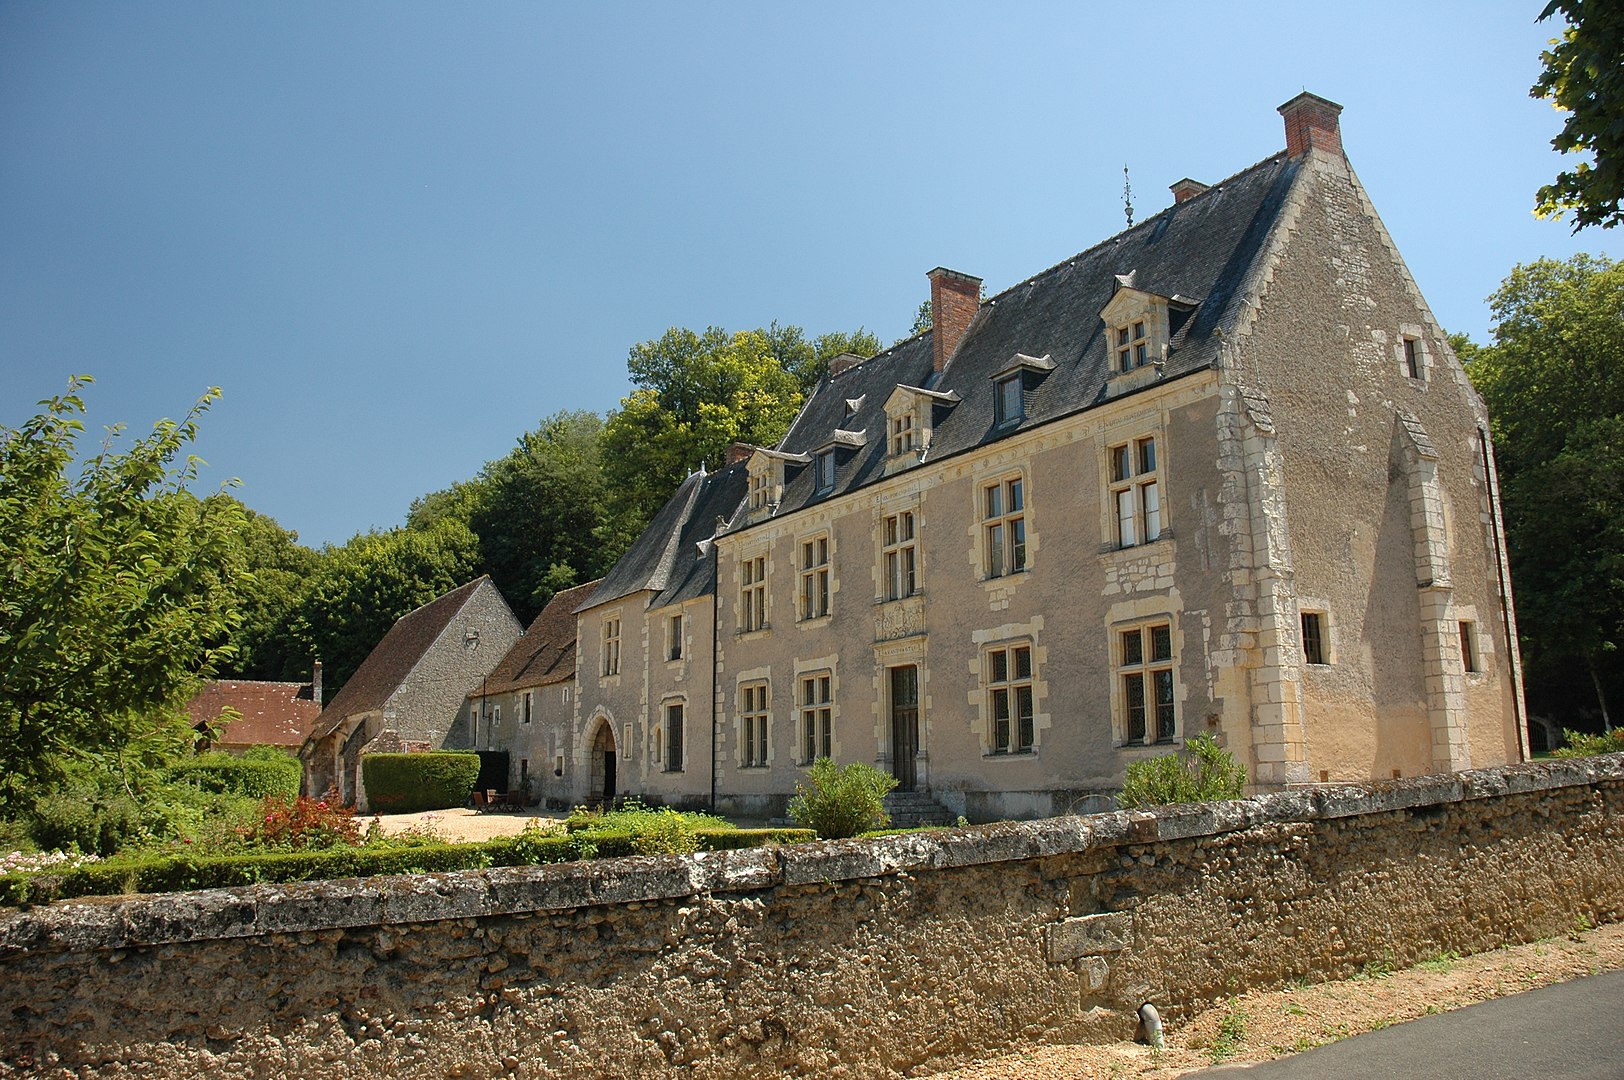 Château de la Possoniere © GIRAUD Patrick - licence [CC BY 2.5] from Wikimedia Commons